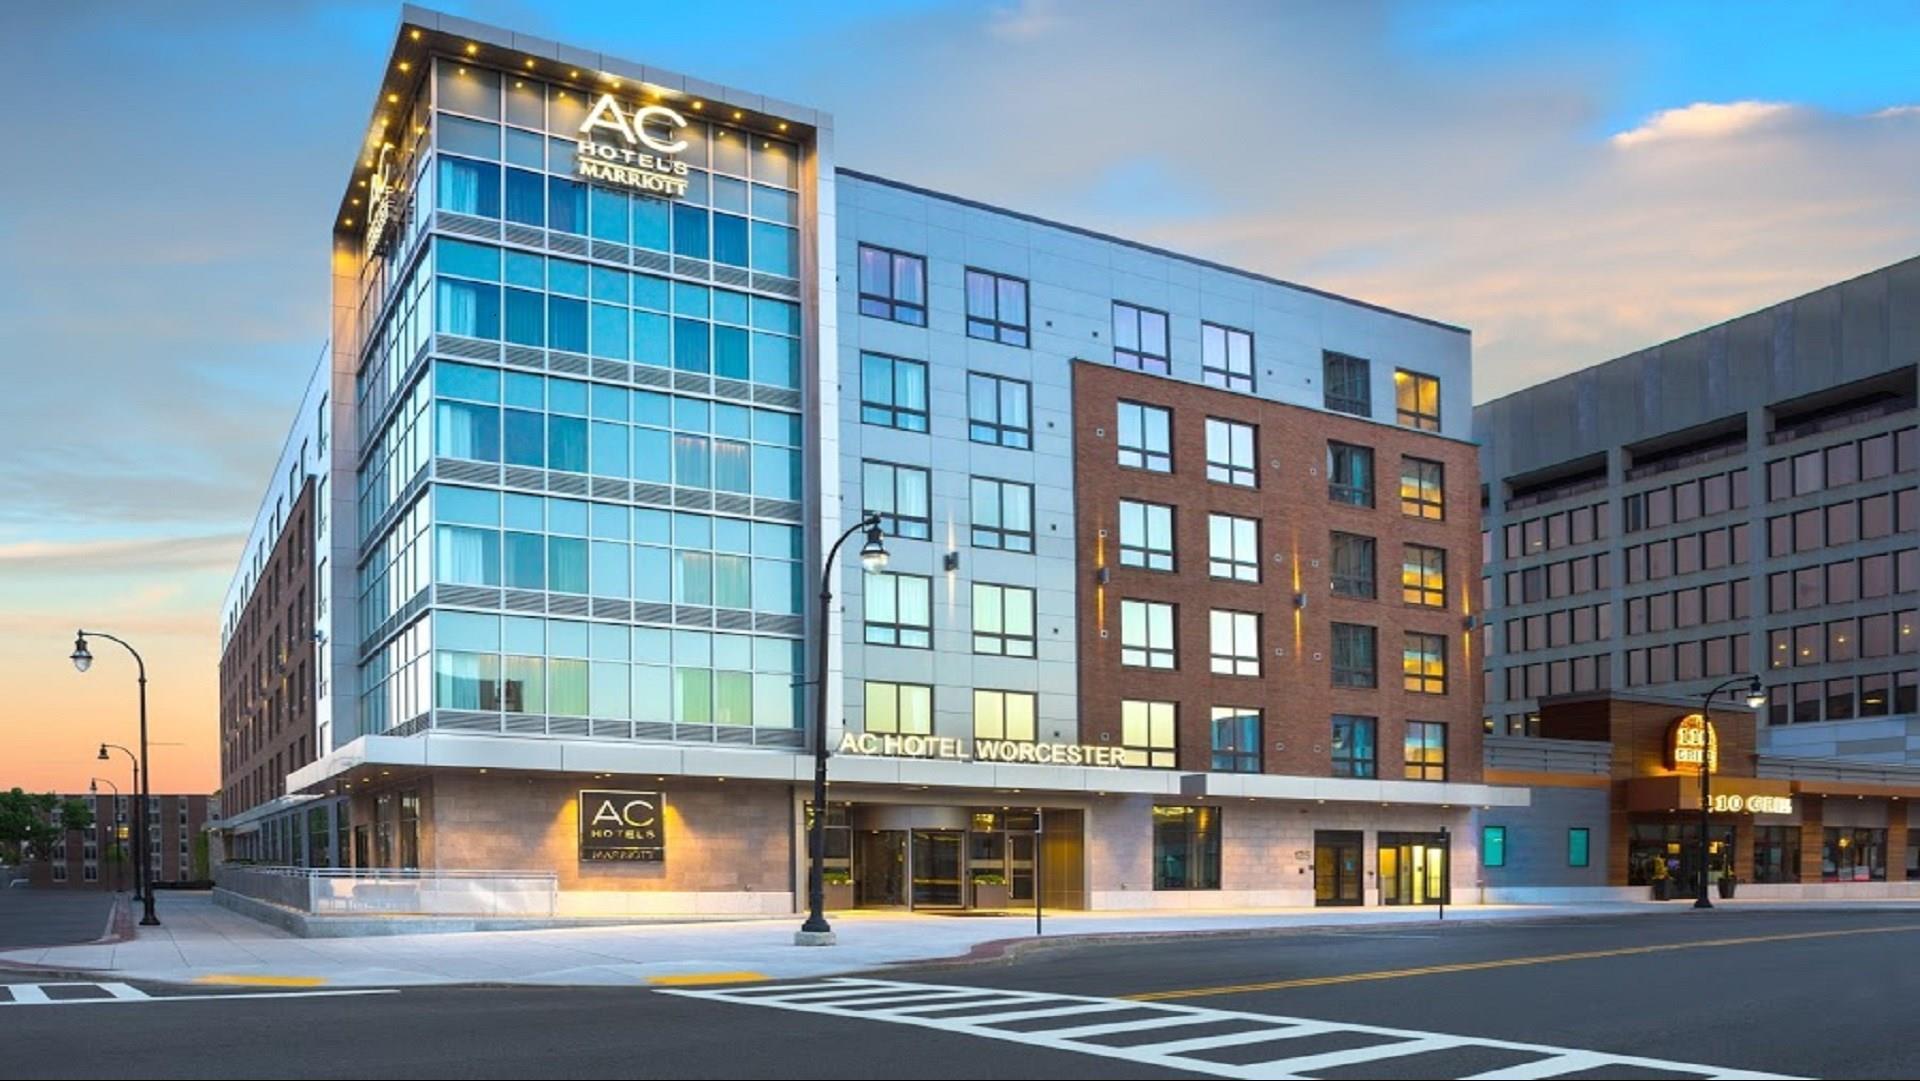 AC Hotel Worcester in Worcester, MA